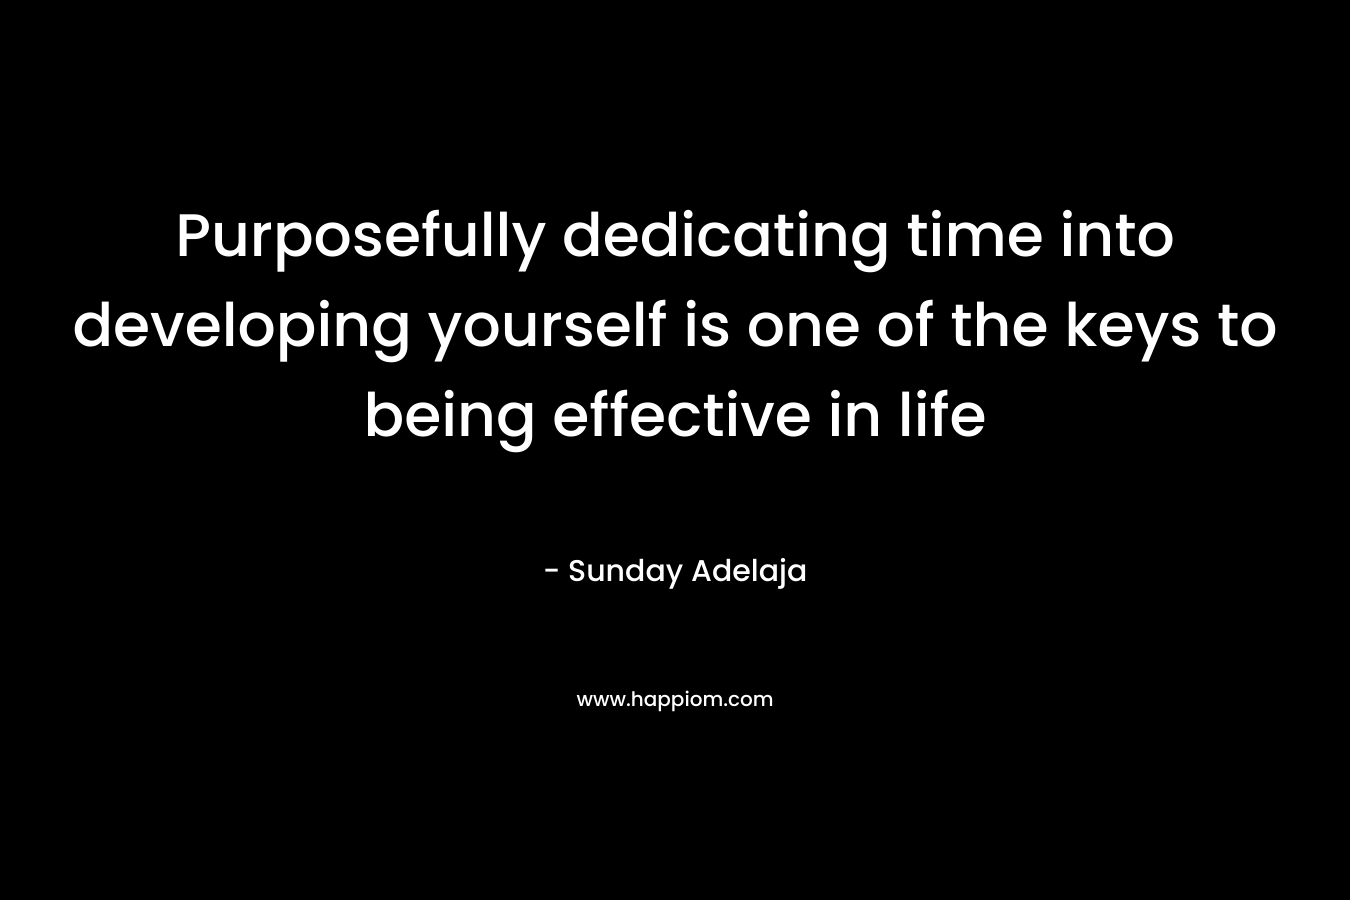 Purposefully dedicating time into developing yourself is one of the keys to being effective in life